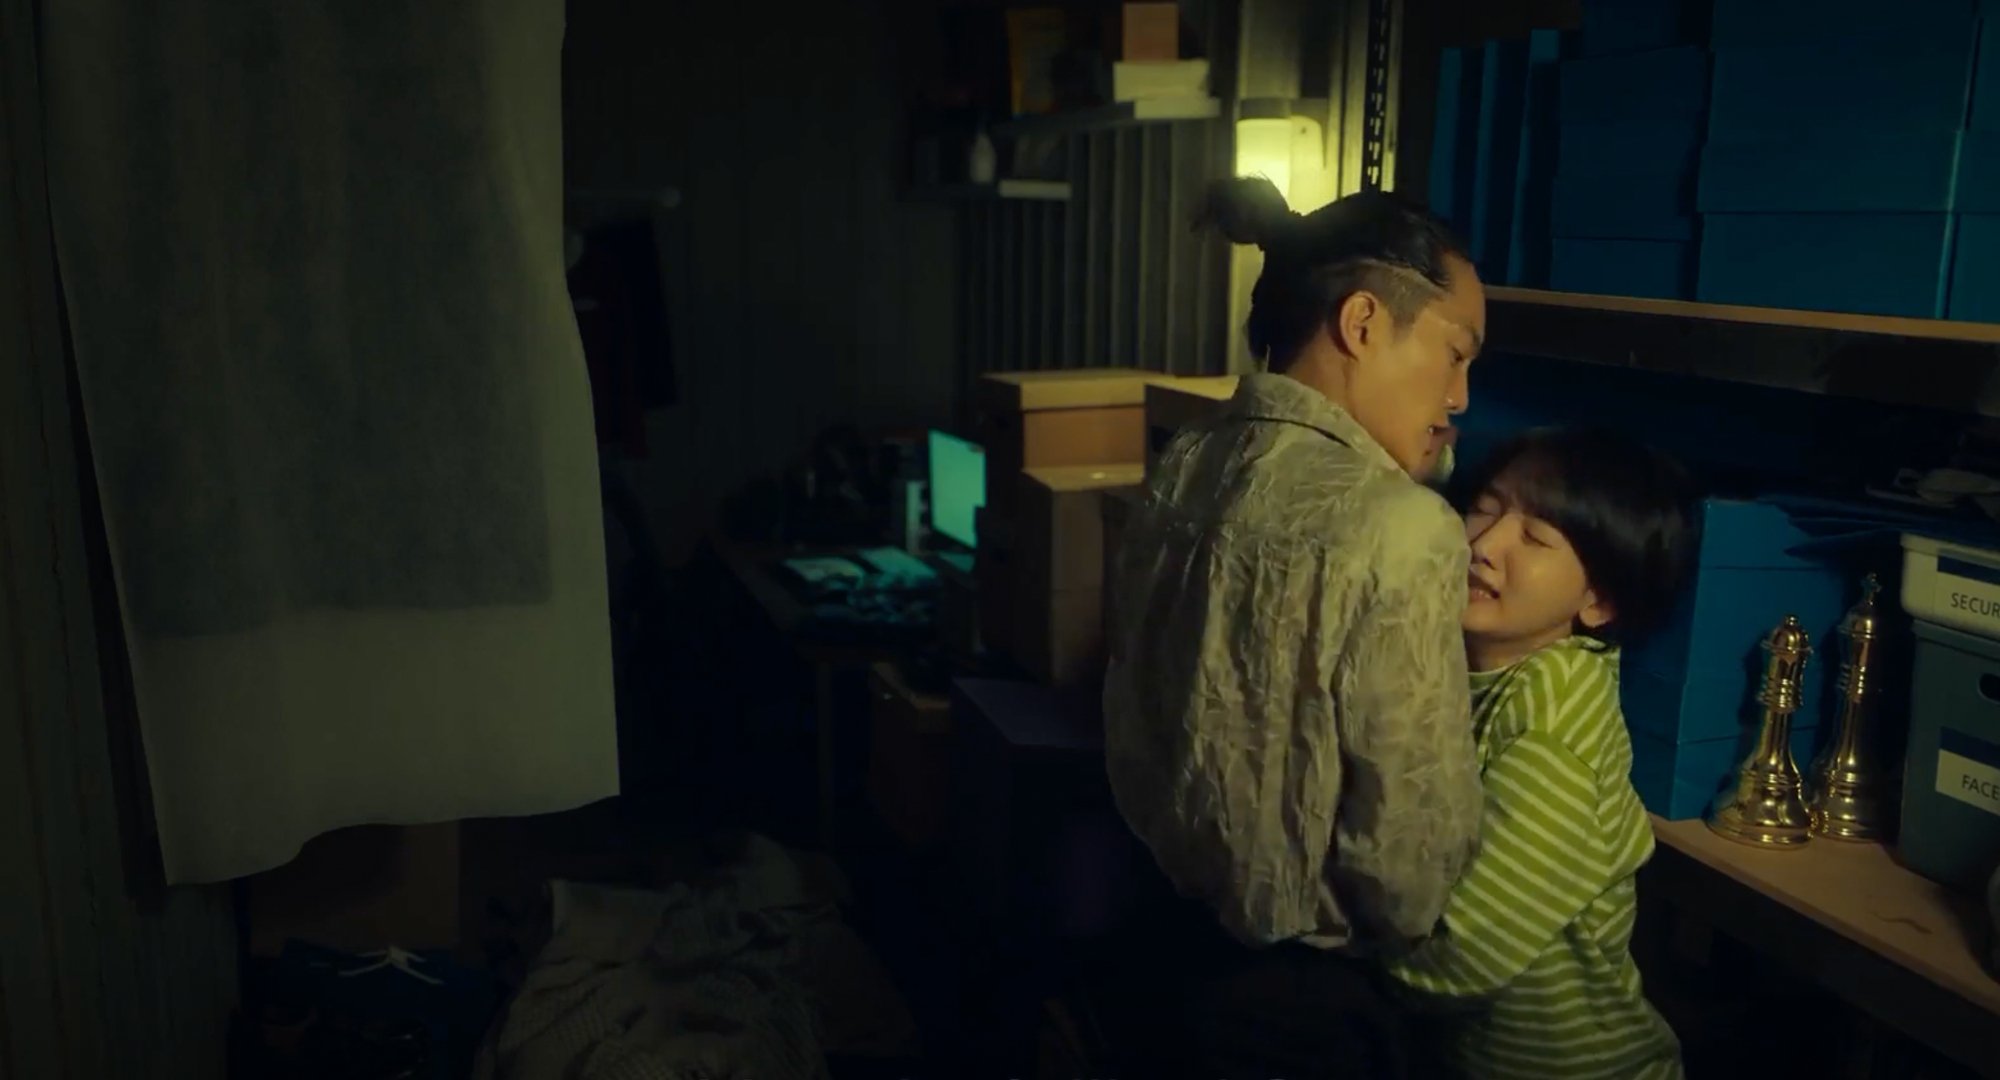 Myeong-o and Gyeong-ran in 'The Glory' Part 2 sex scene.